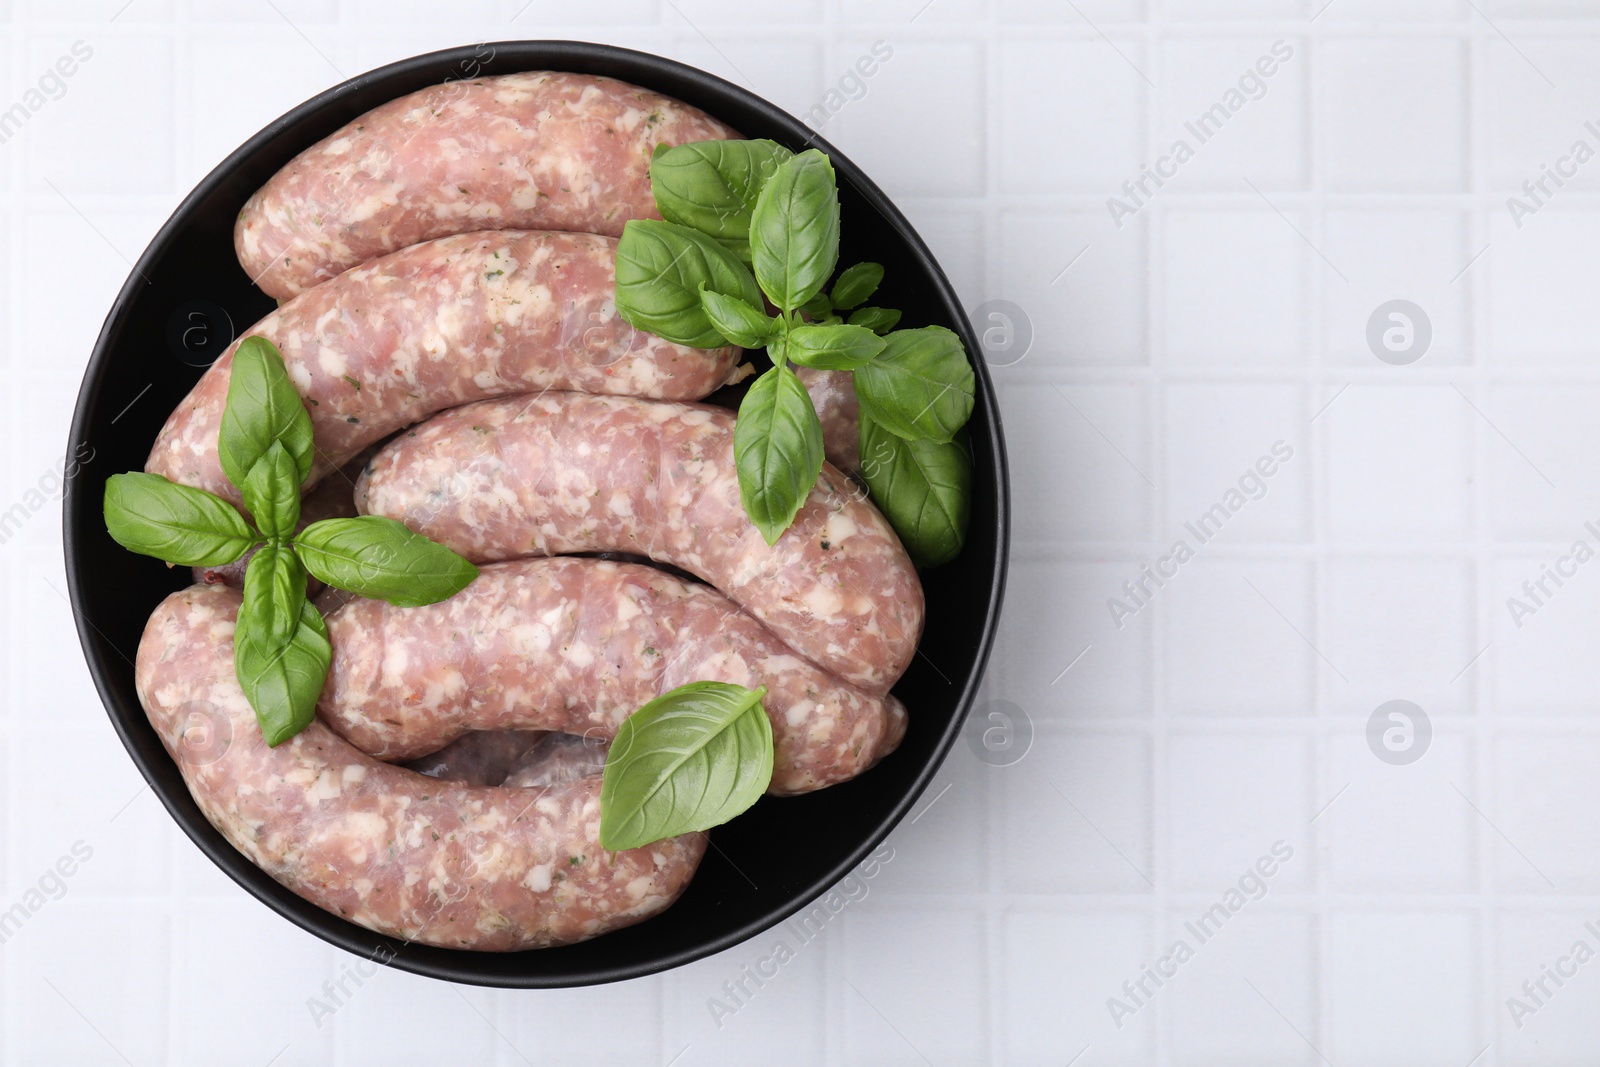 Photo of Raw homemade sausages and basil leaves on white tiled table, top view. Space for text